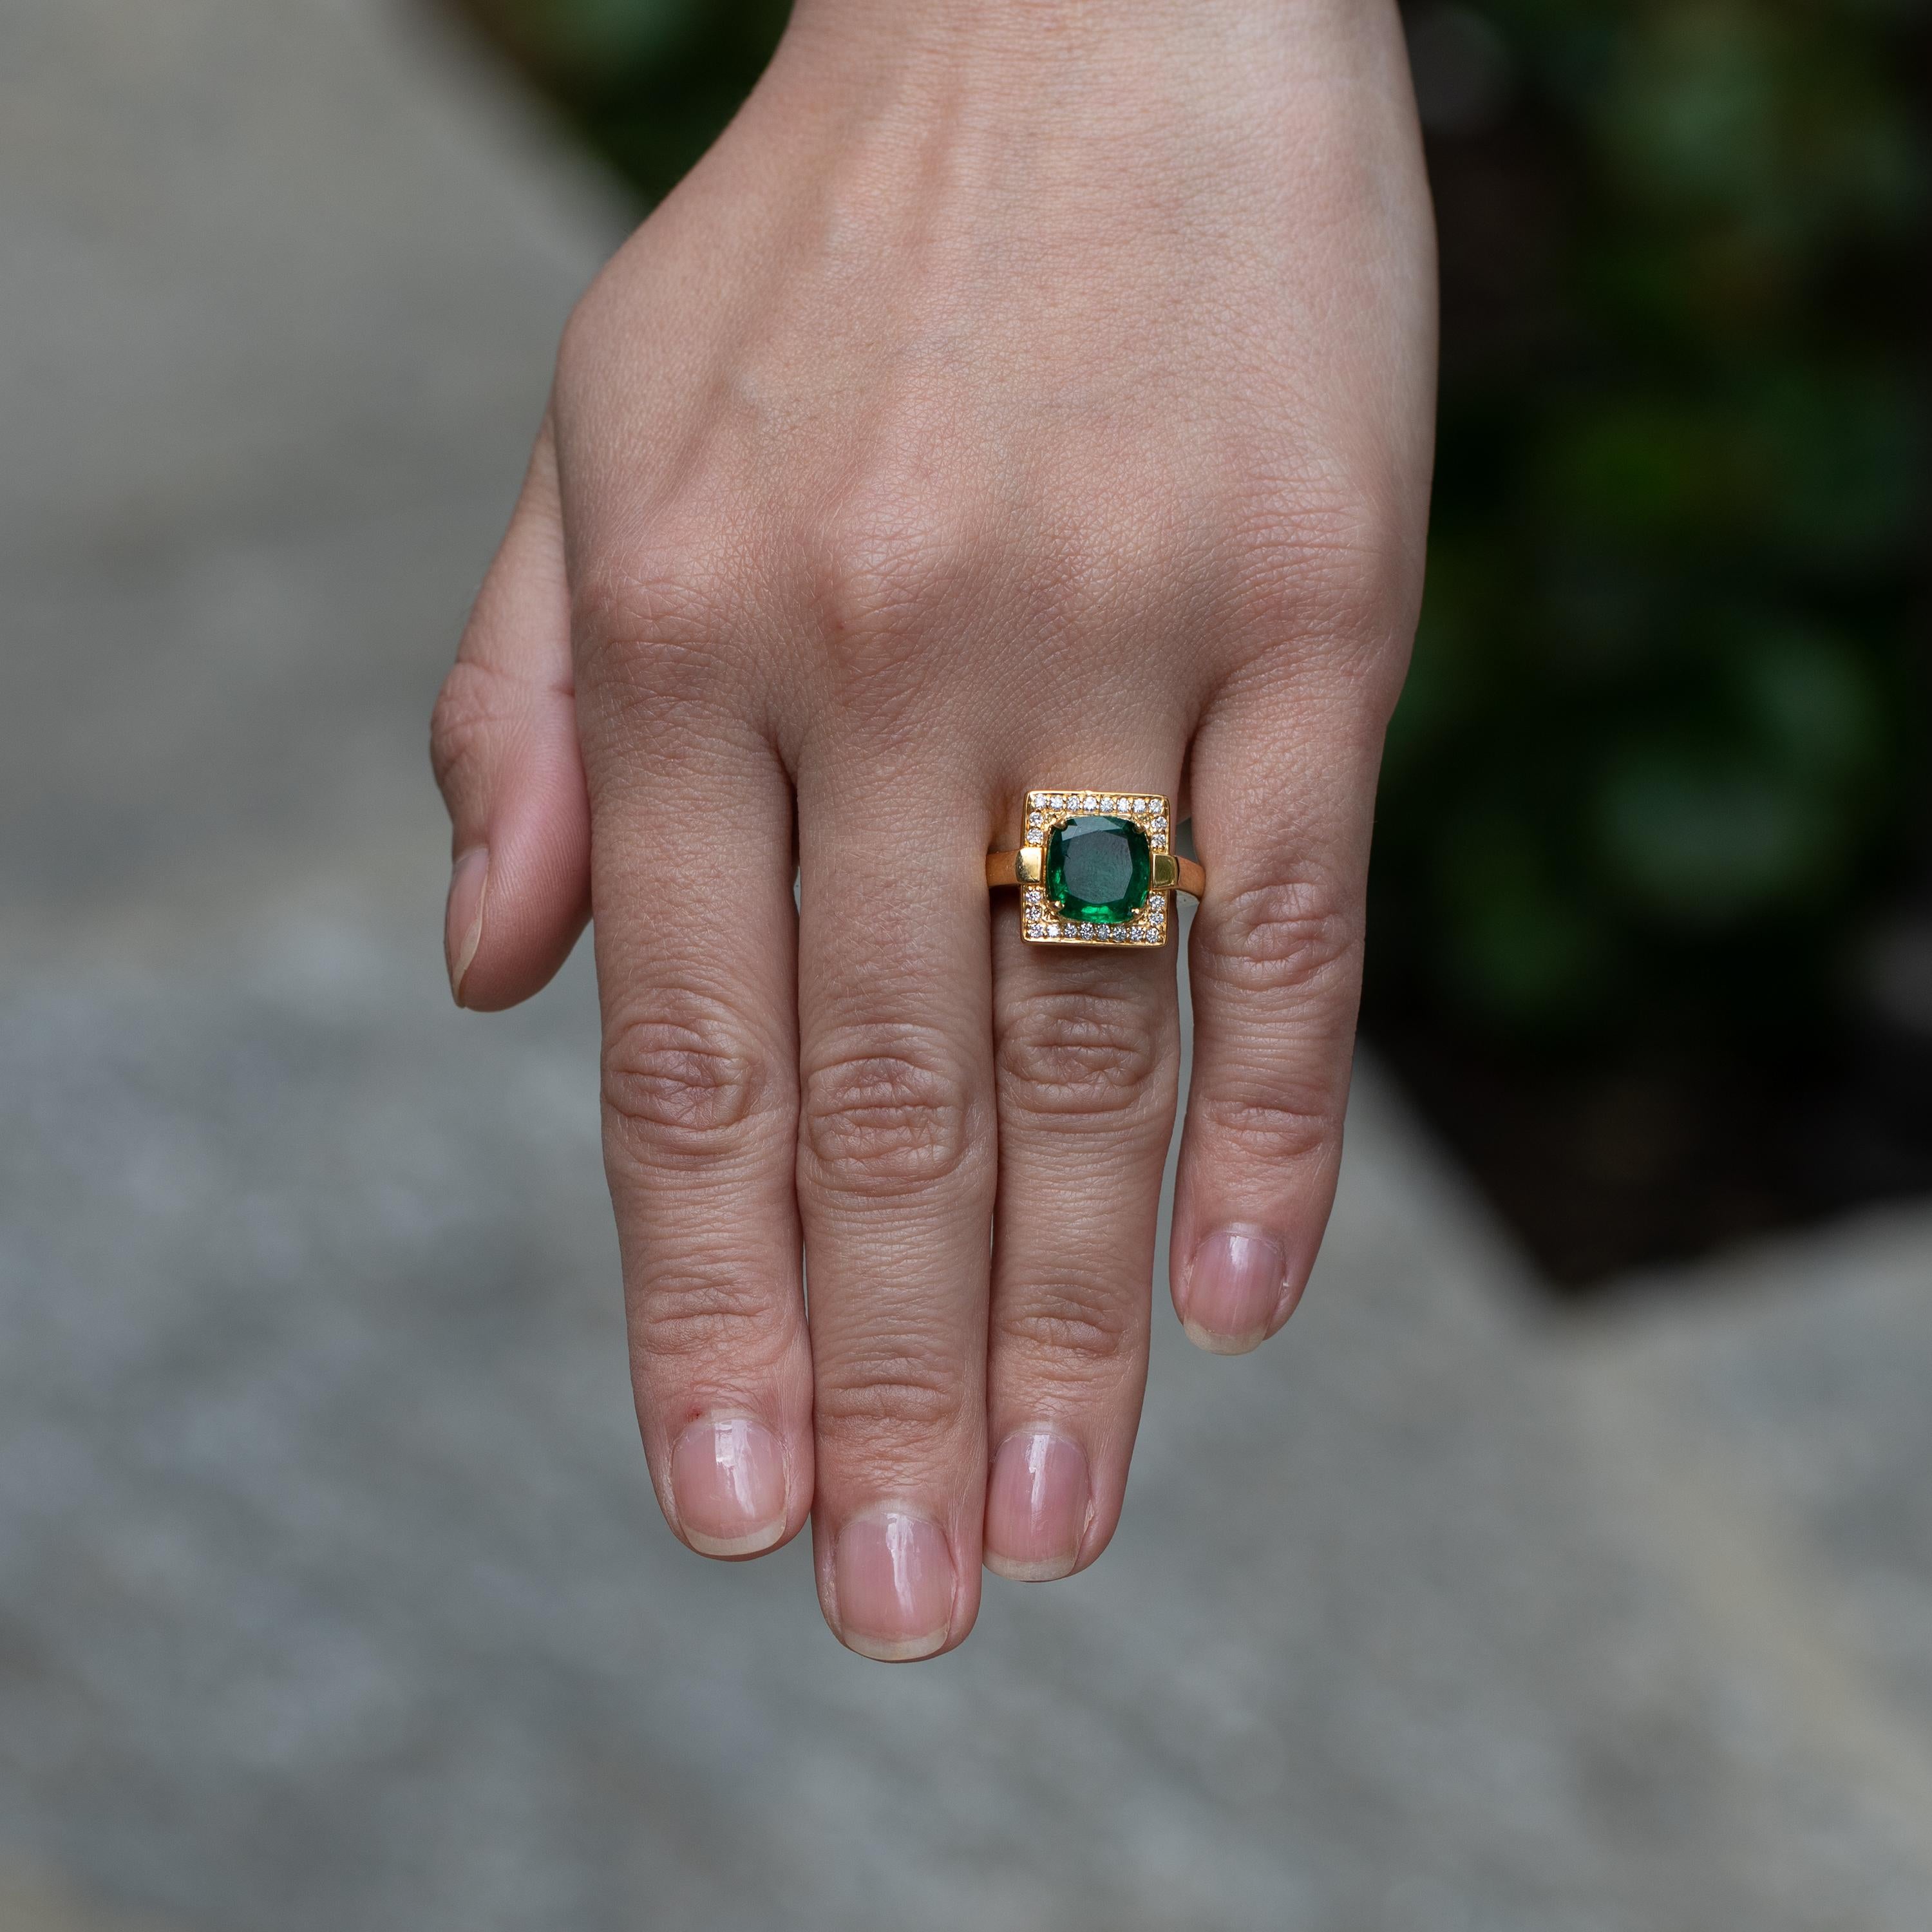 This Beautiful Setting Wonderfully Encases This Stunning Emerald, Really Showing Off Just How Amazing It Is. 
Vert Fine Emerald = 2.91 carats
Diamonds = 0.24 carats
( Color: F, Clarity: VS )
18K Yellow Gold
Ring Size = 3.5
Complimentary Ring Sizing